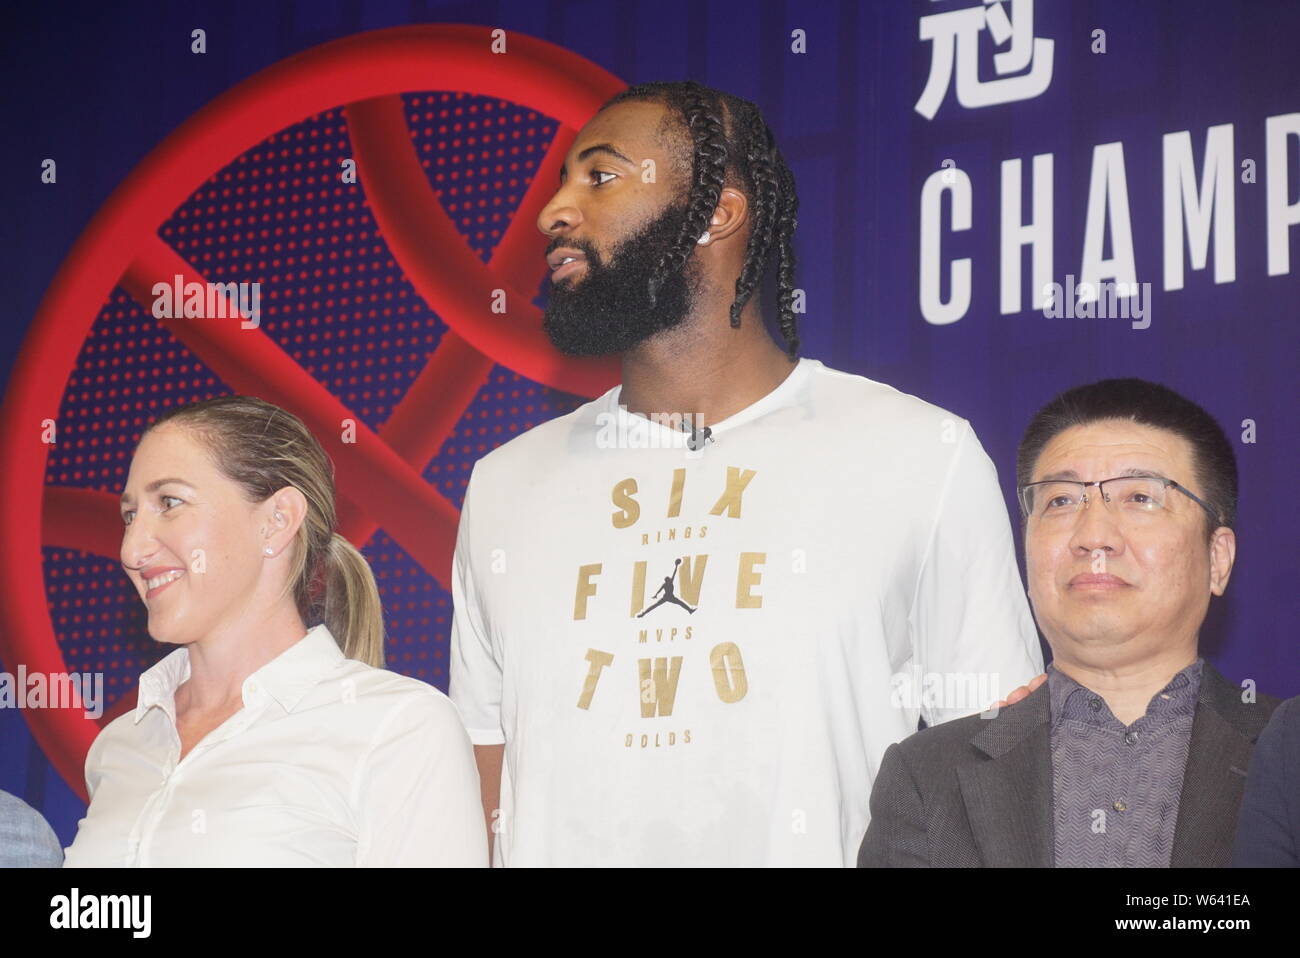 NBA star Andre Drummond of Detroit Pistons attends a press conference for the NBA Championship Exhibition in Shanghai, China, 31 August 2018. Stock Photo